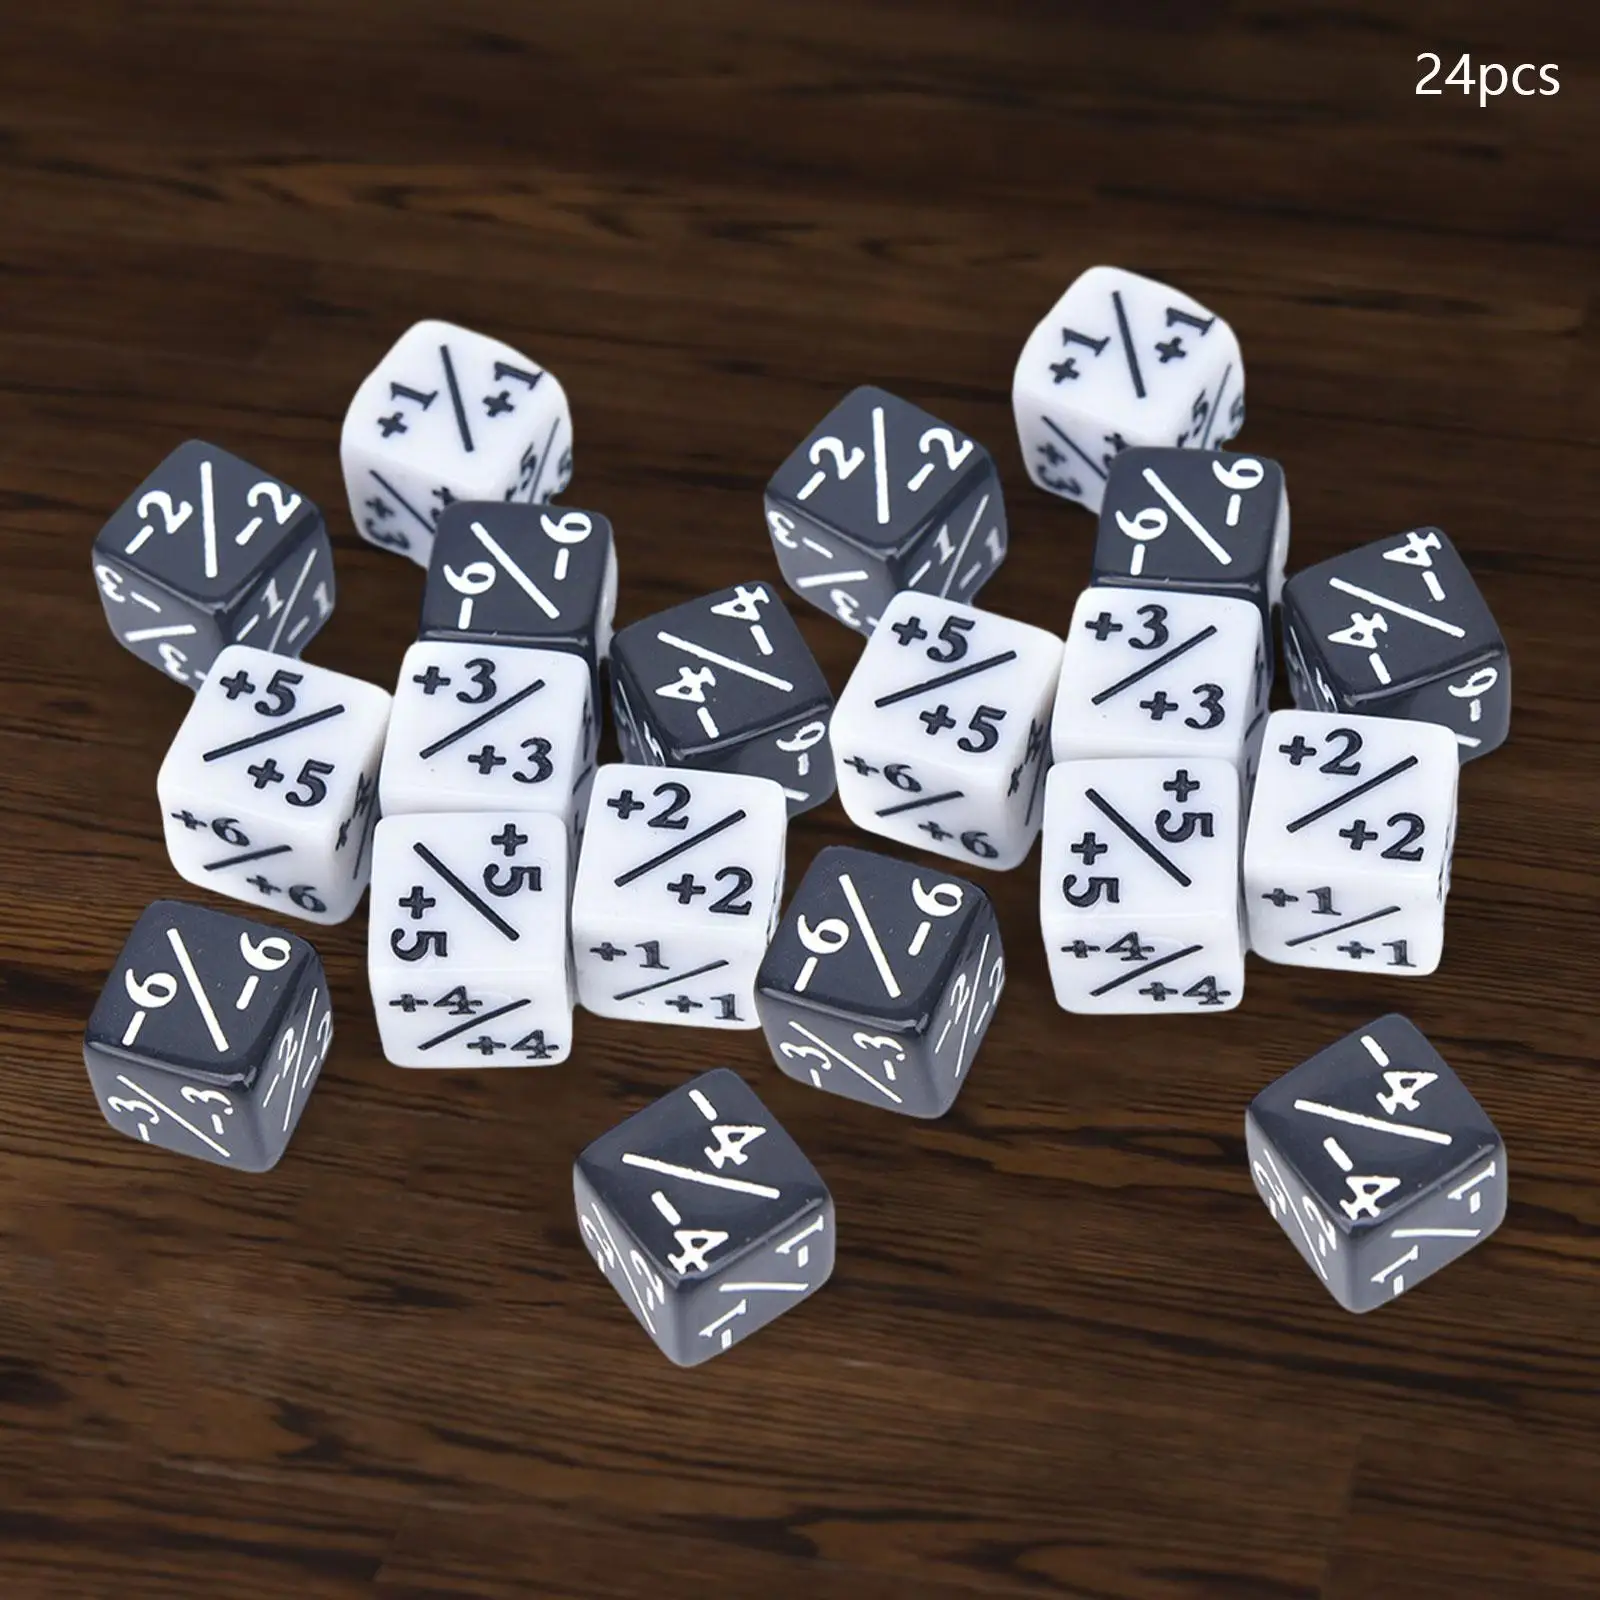 24 Pieces Counter Token Dice D6 for Party Favors Teaching Props Math Game